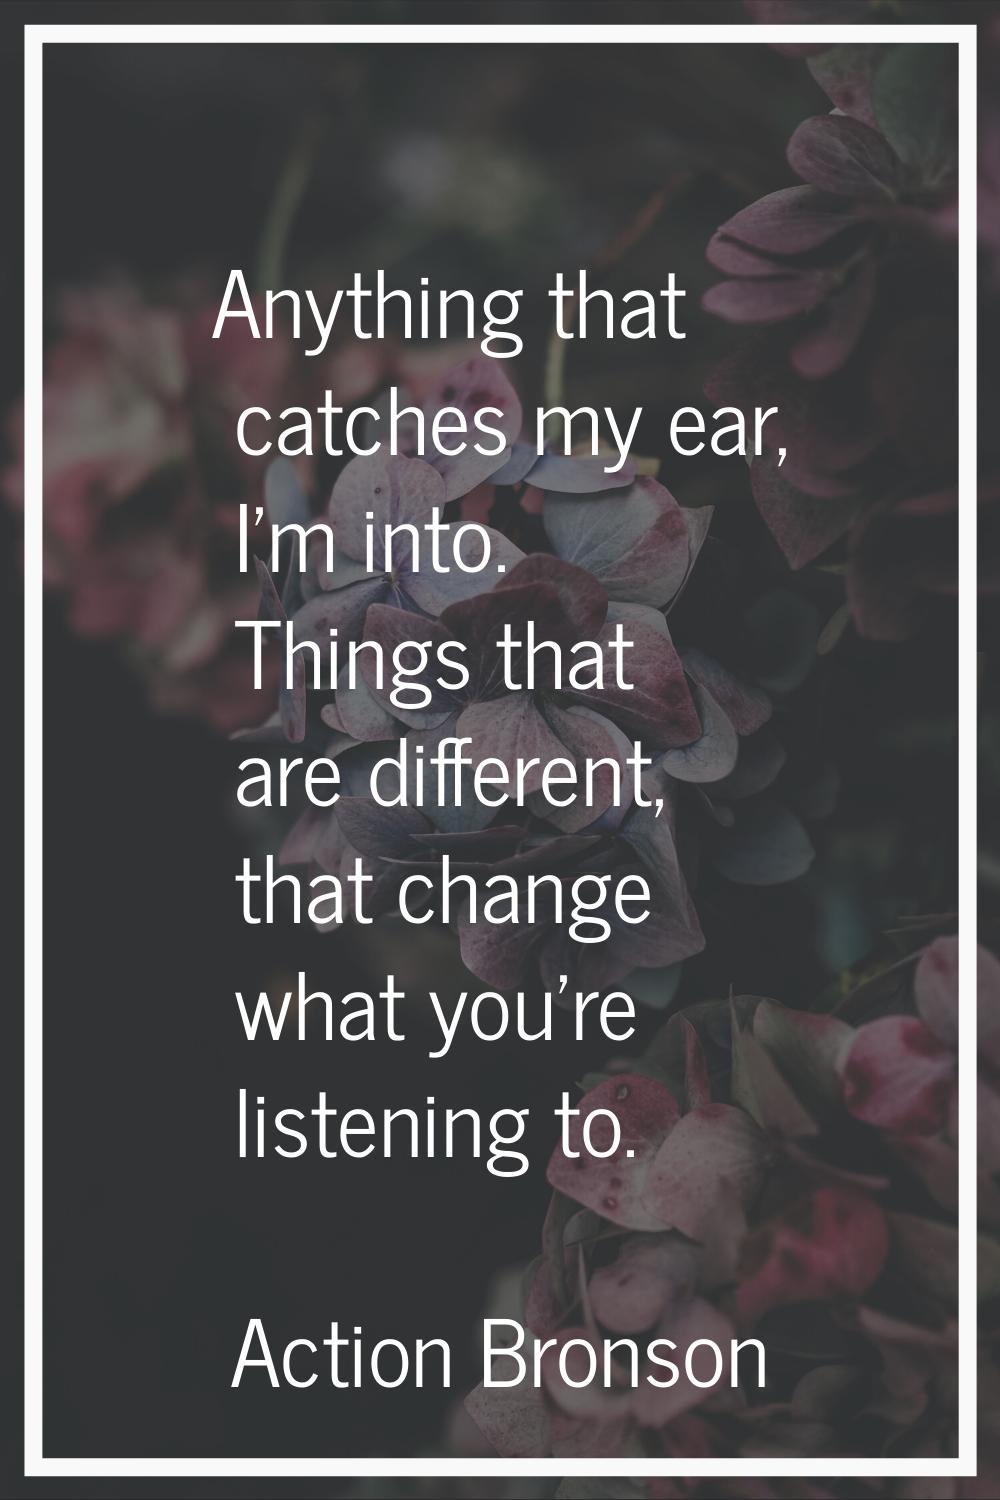 Anything that catches my ear, I'm into. Things that are different, that change what you're listenin